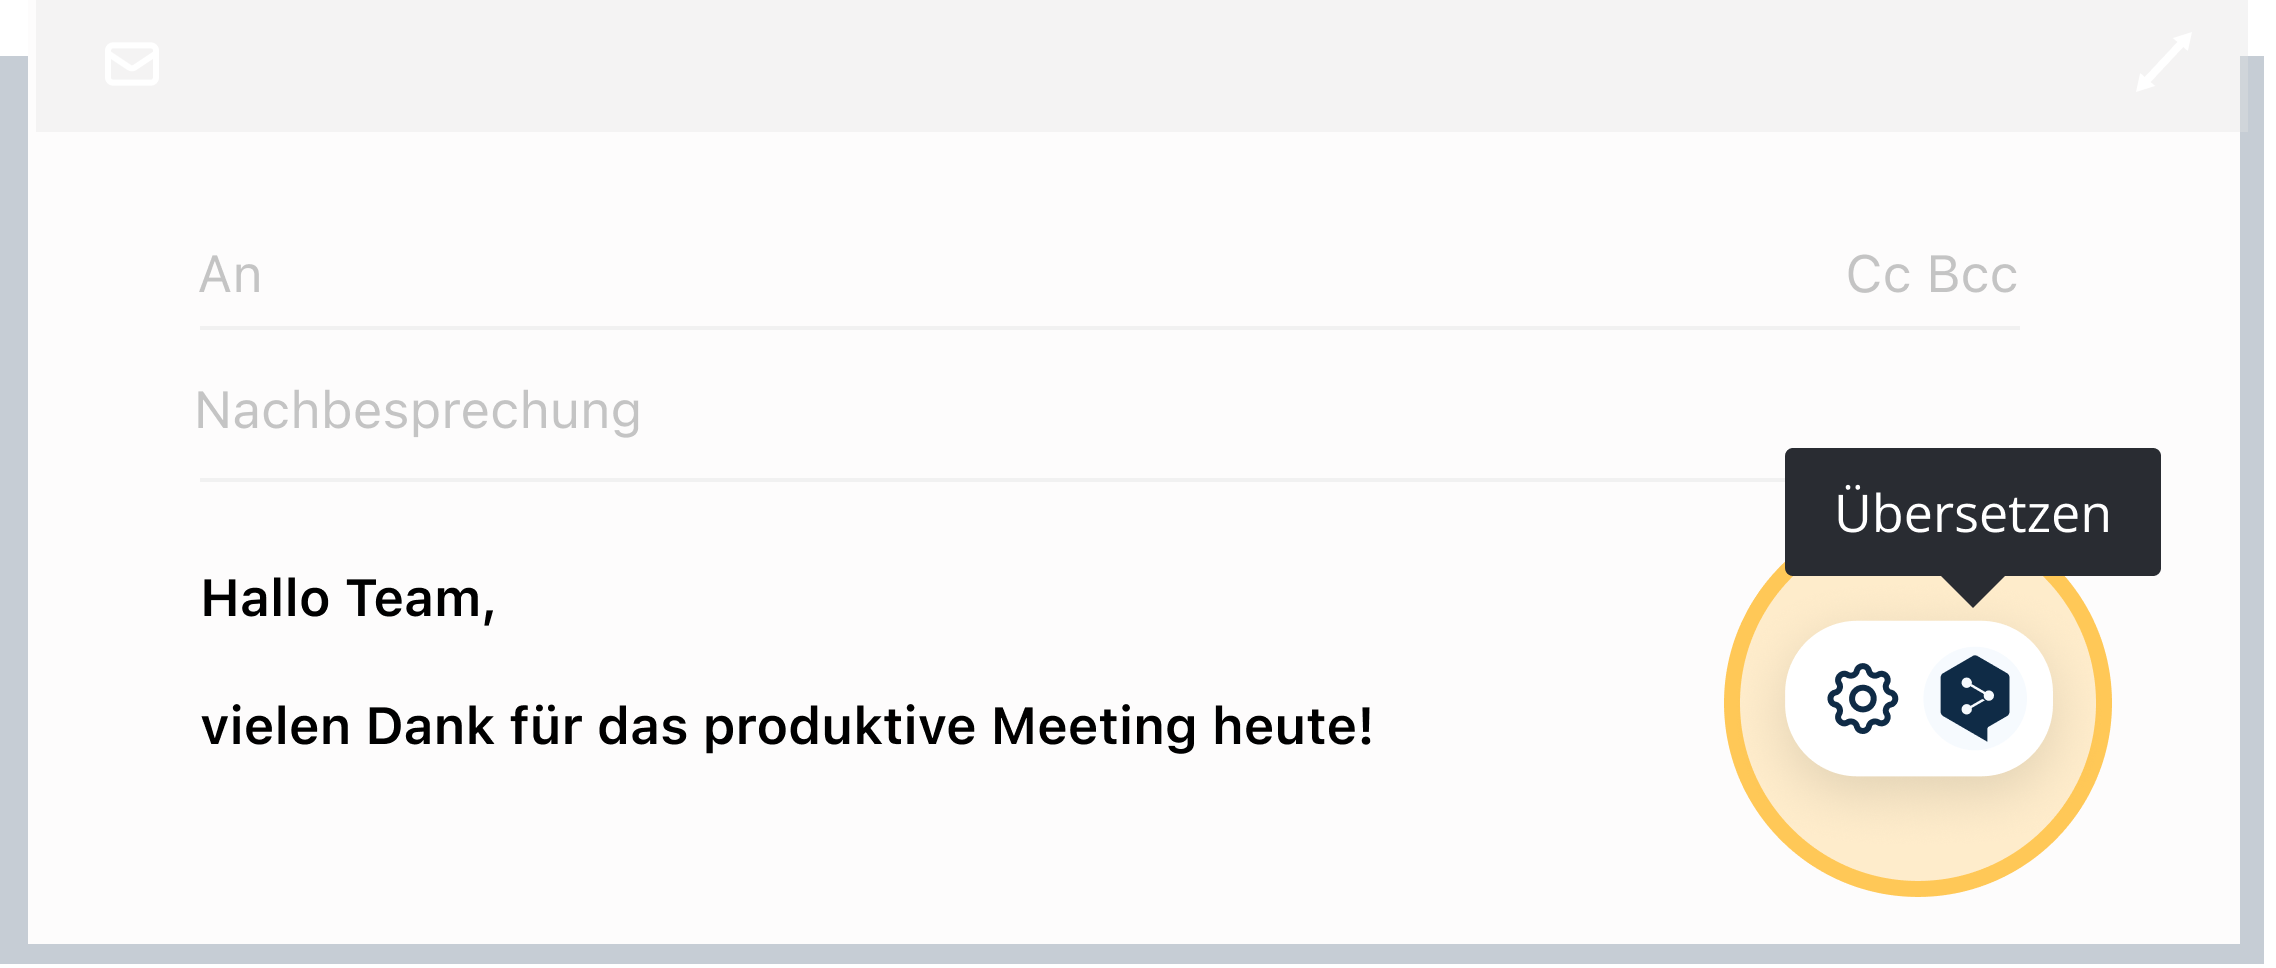 A sample email with the subject line "Hi team, thank you for a product meeting today!" to the right you can click on the translate icon to translate this email to a different language.